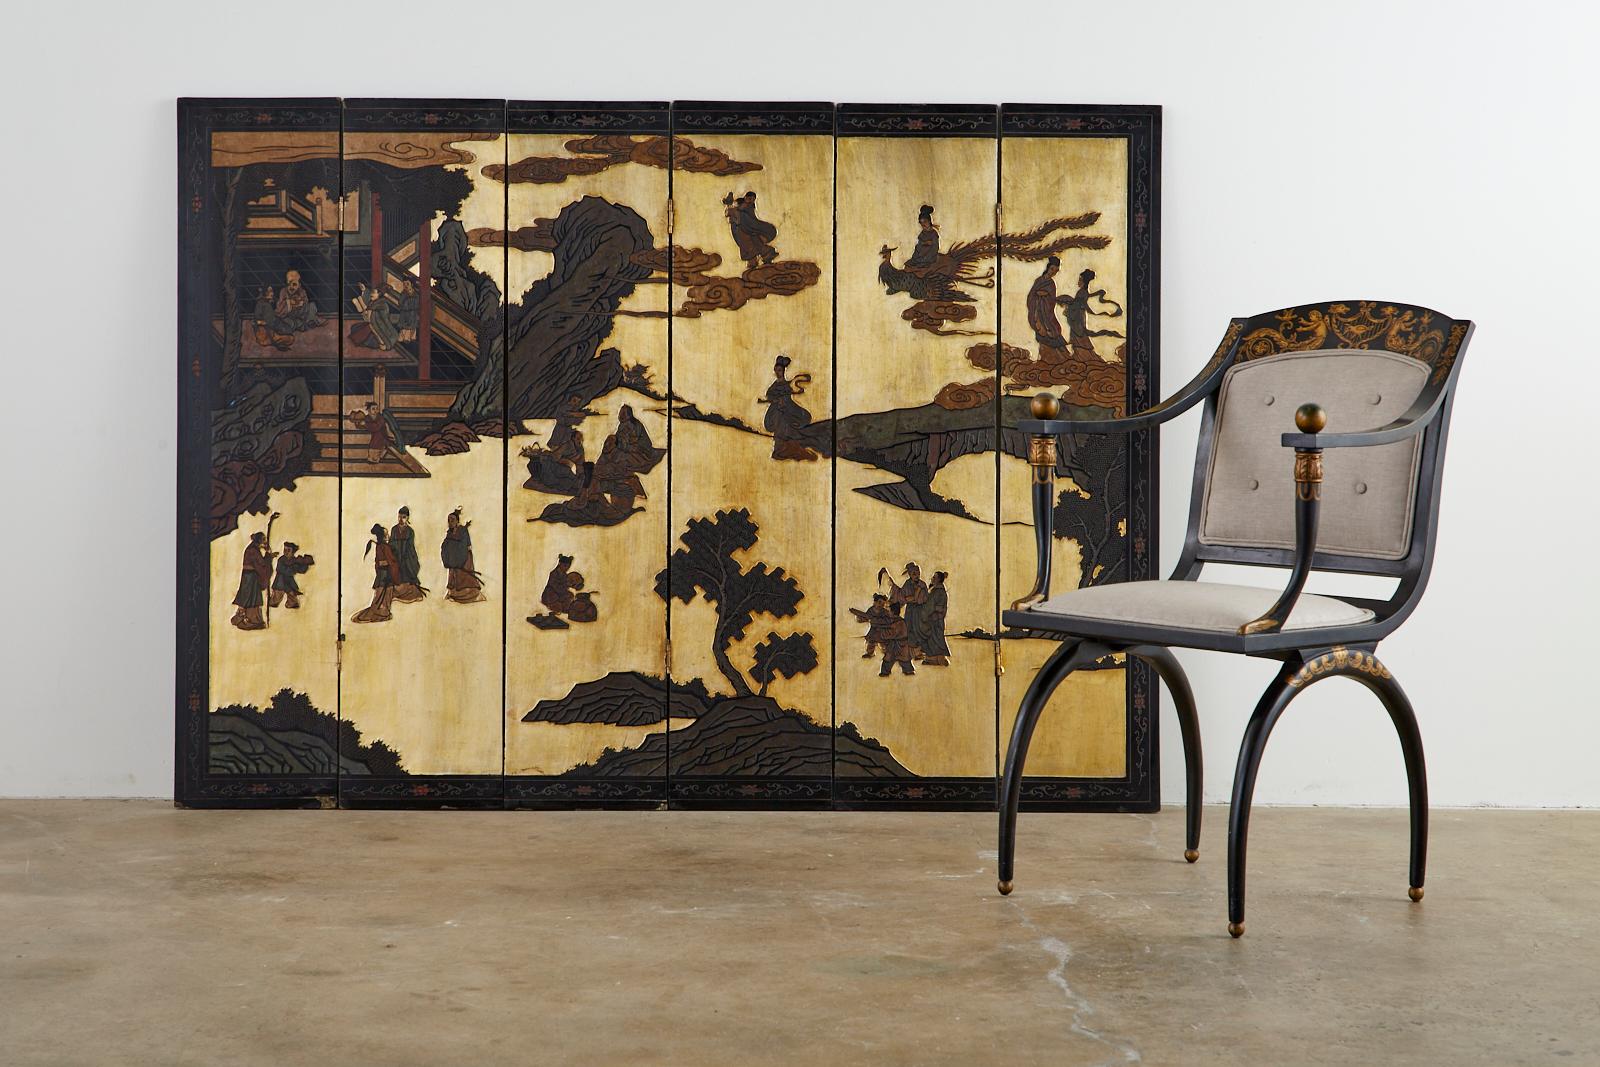 Fascinating Chinese export six-panel coromandel screen featuring mythical figures of 8 immortals, 3 star gods, and xiwangmu. The scene has a dramatic gold leaf style background of gilt. The reverse side of the screen has a sparse bamboo landscape